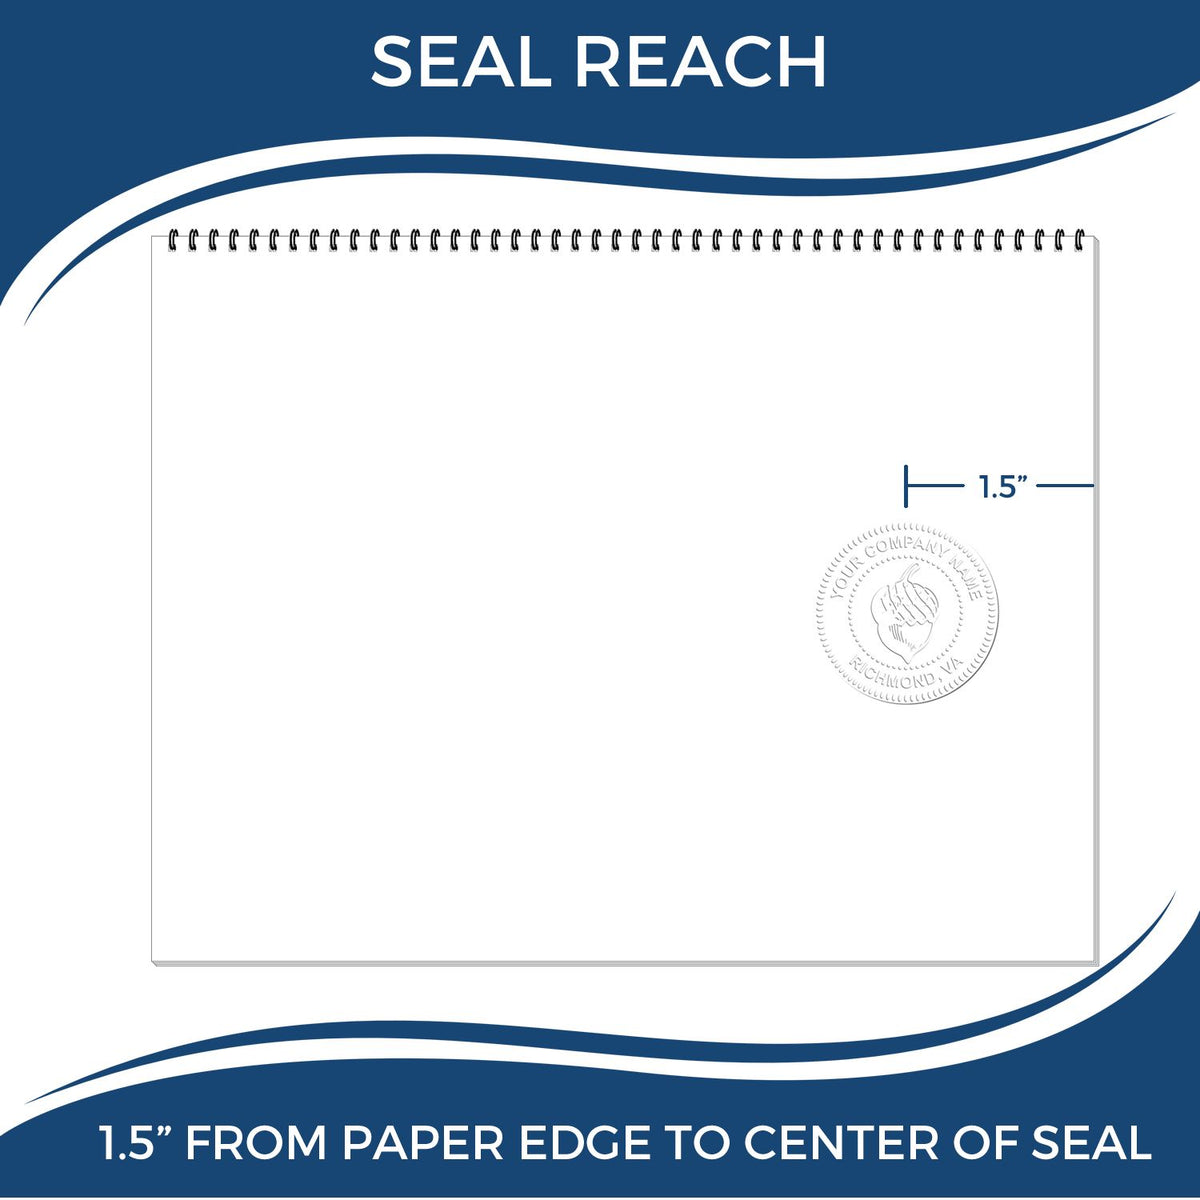 An infographic showing the seal reach which is represented by a ruler and a miniature seal image of the Louisiana Desk Surveyor Seal Embosser